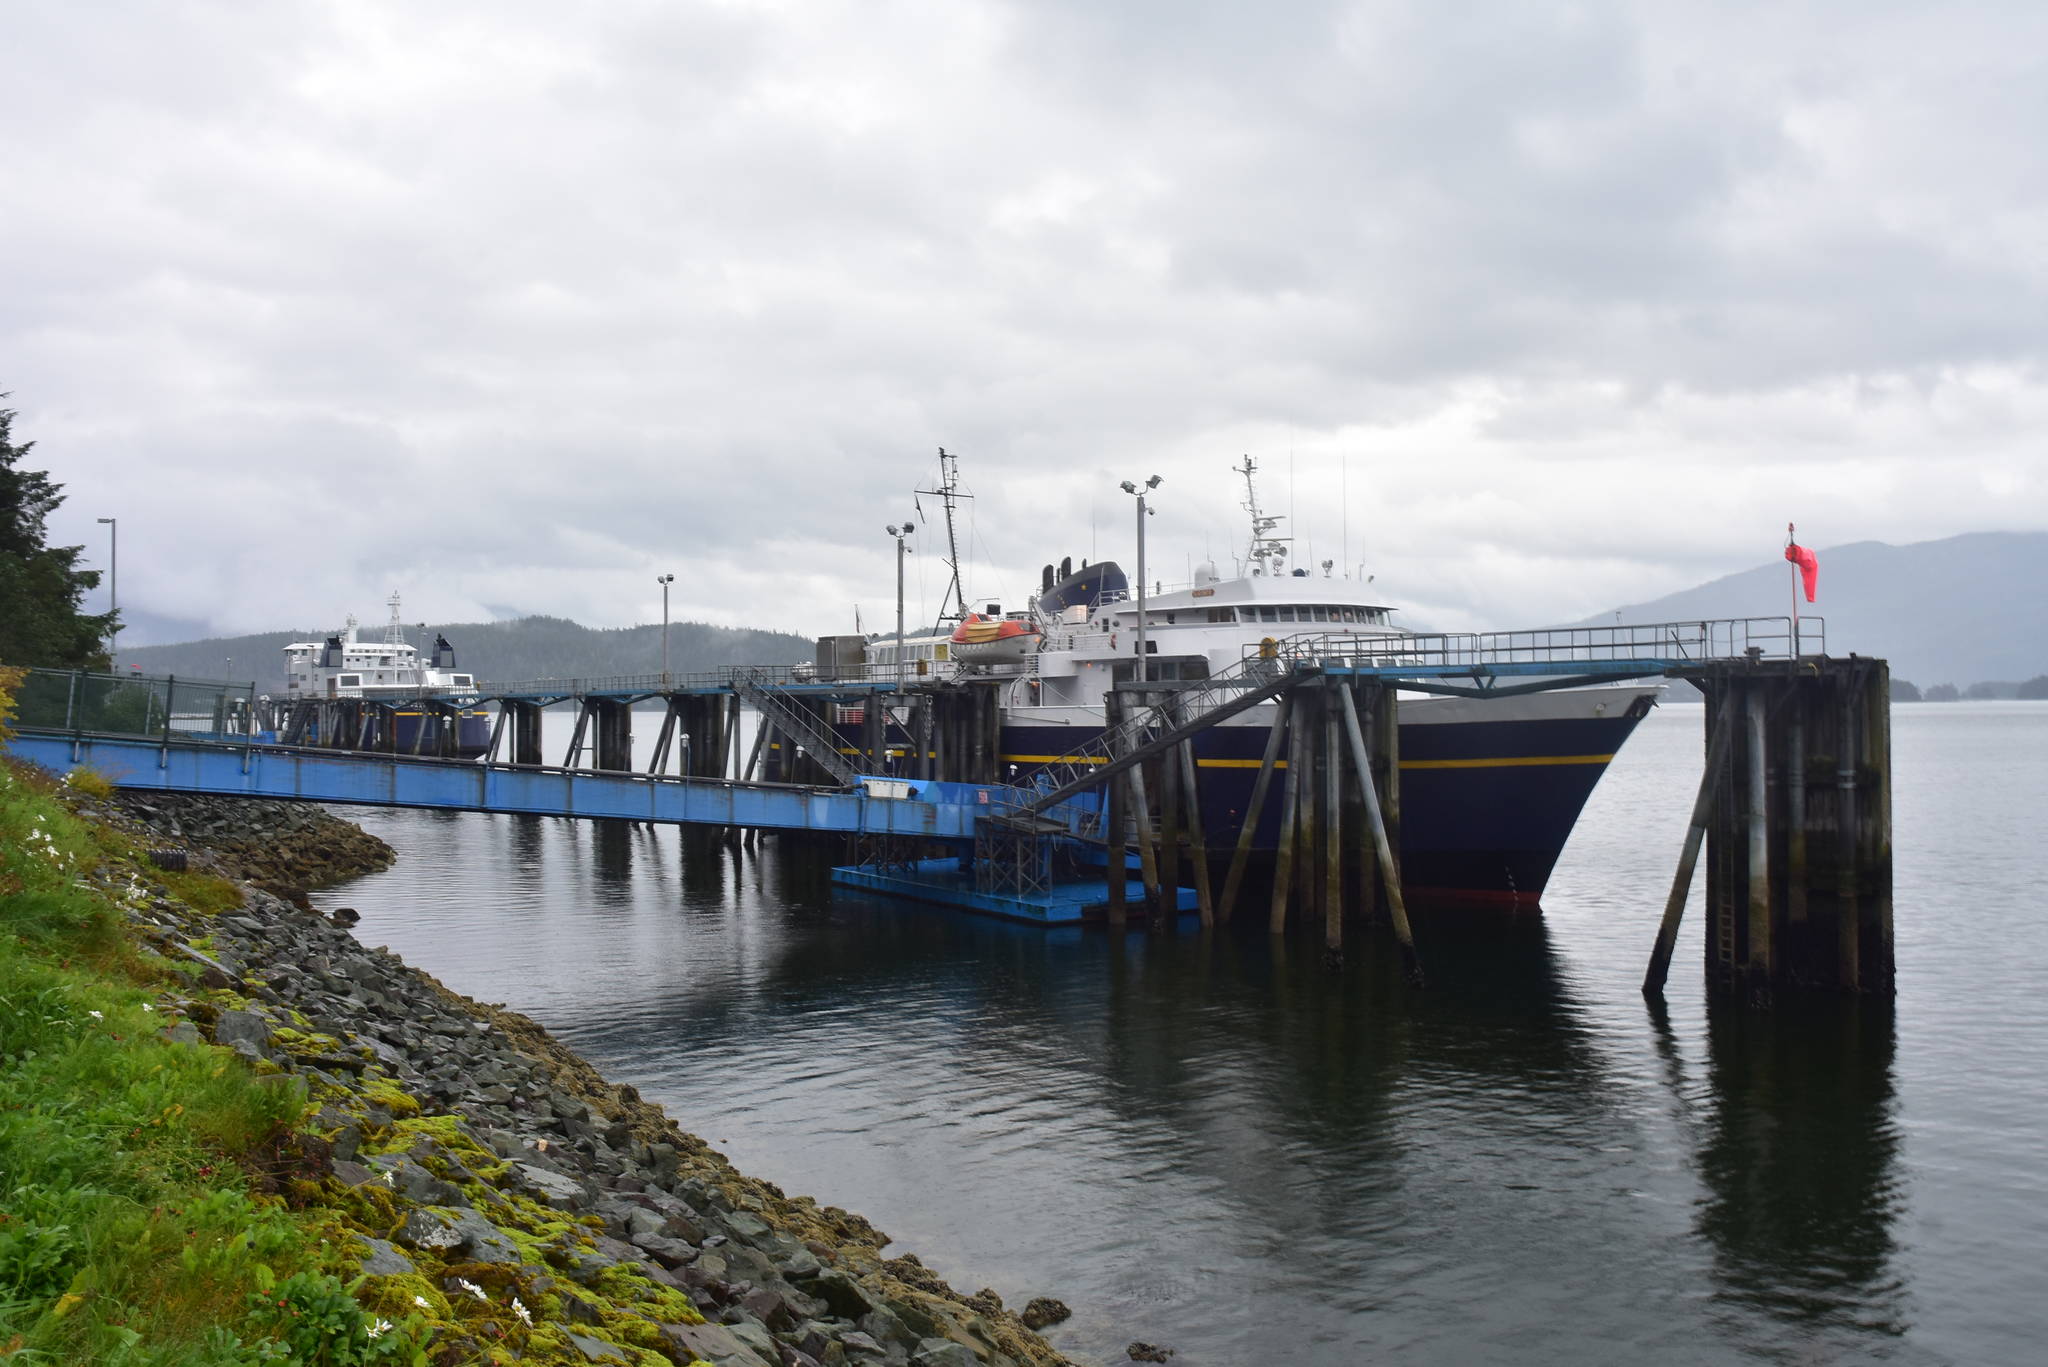 MV LeConte docks at the Auke Bay Ferry Terminal with the MV Tazlina in the background on Monday, Aug. 10, 2020. The LeConte was present in Juneau when a bomb threat was made against it Wednesday, Feb. 10, 2021, according to the Juneau Police Department. (Peter Segall / Juneau Empire File)